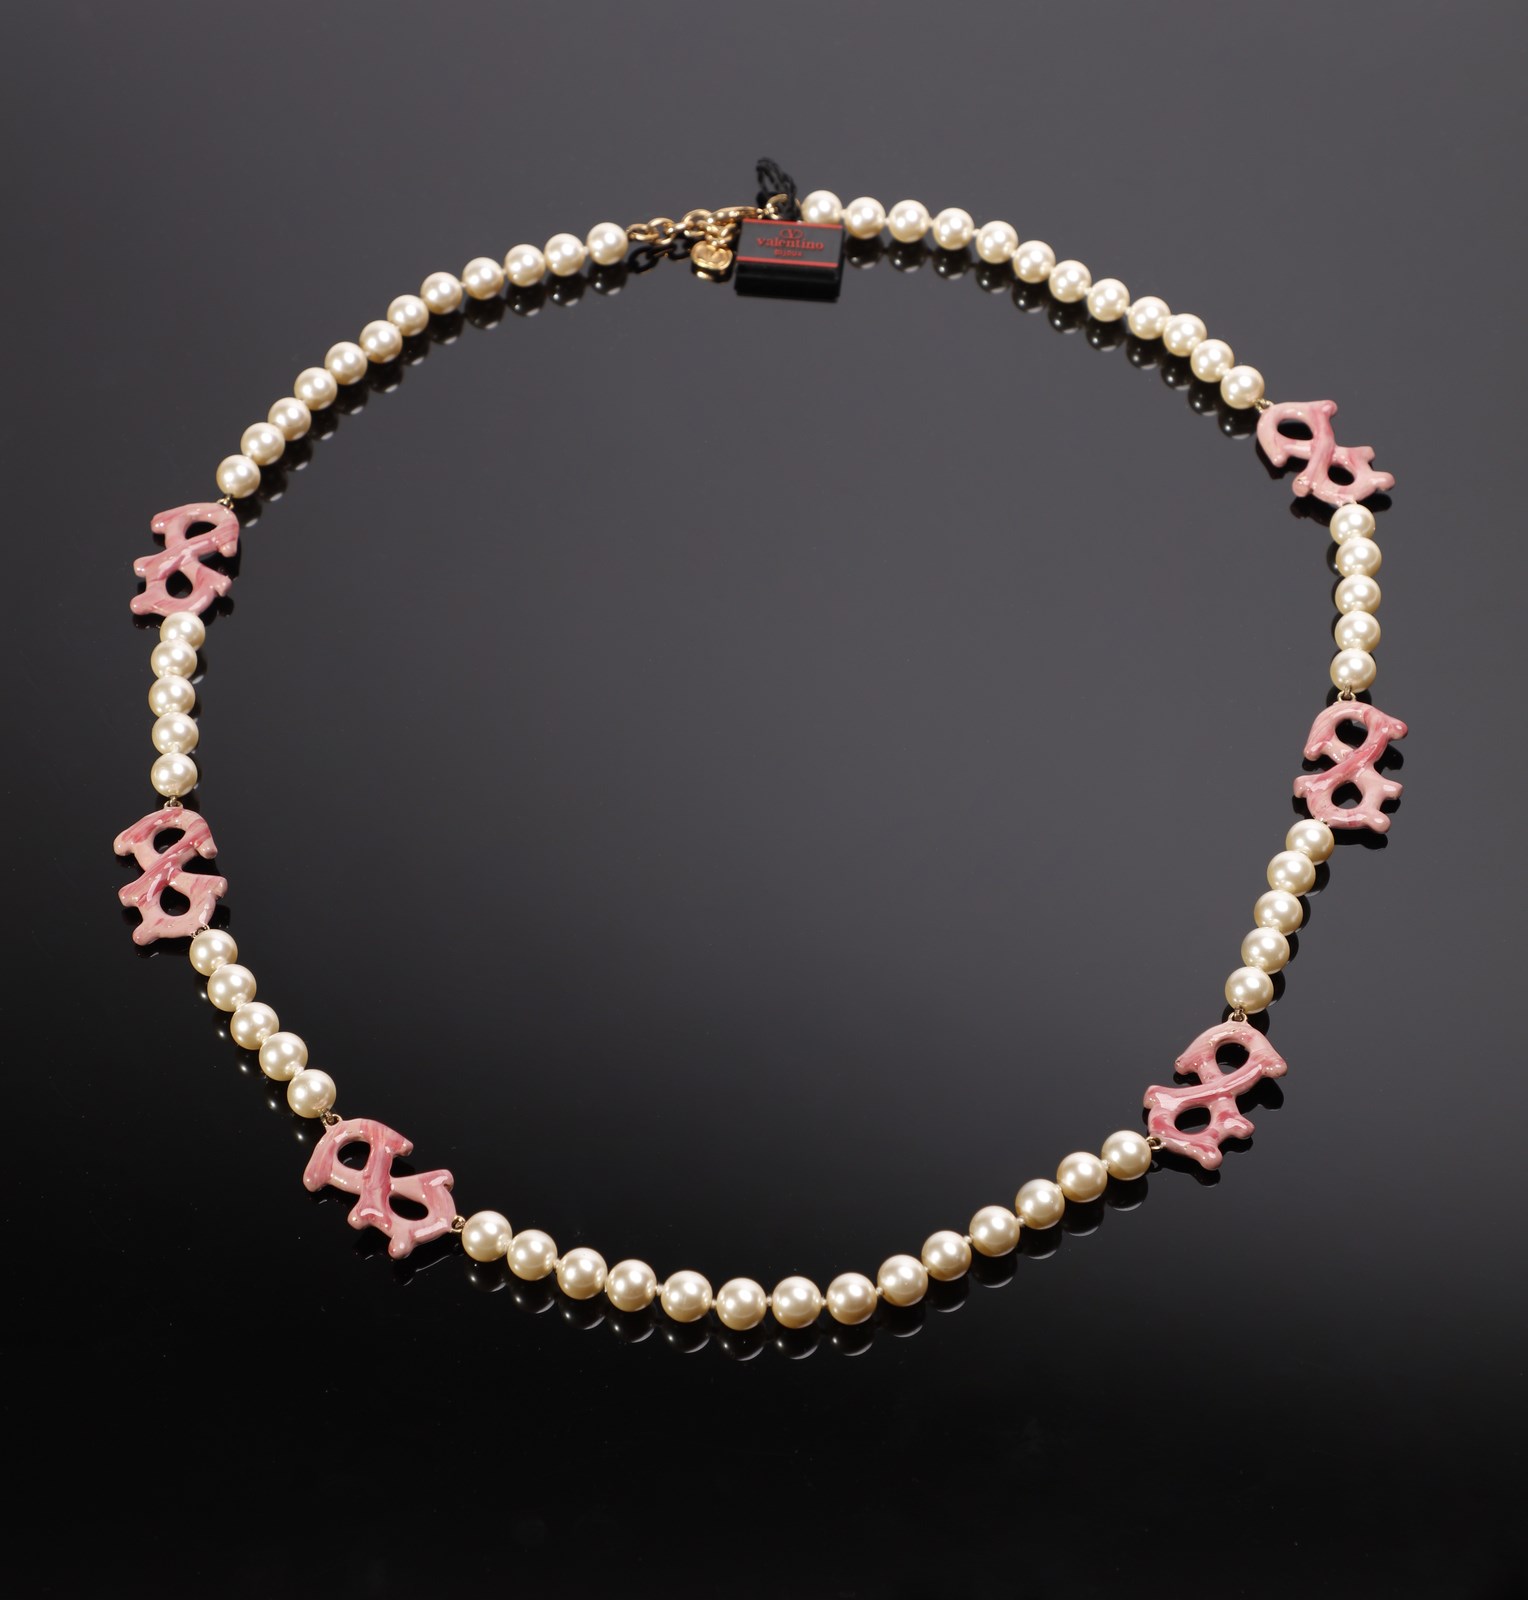 Long strand of artificial pearls with enamels. (Valentino Garavani)